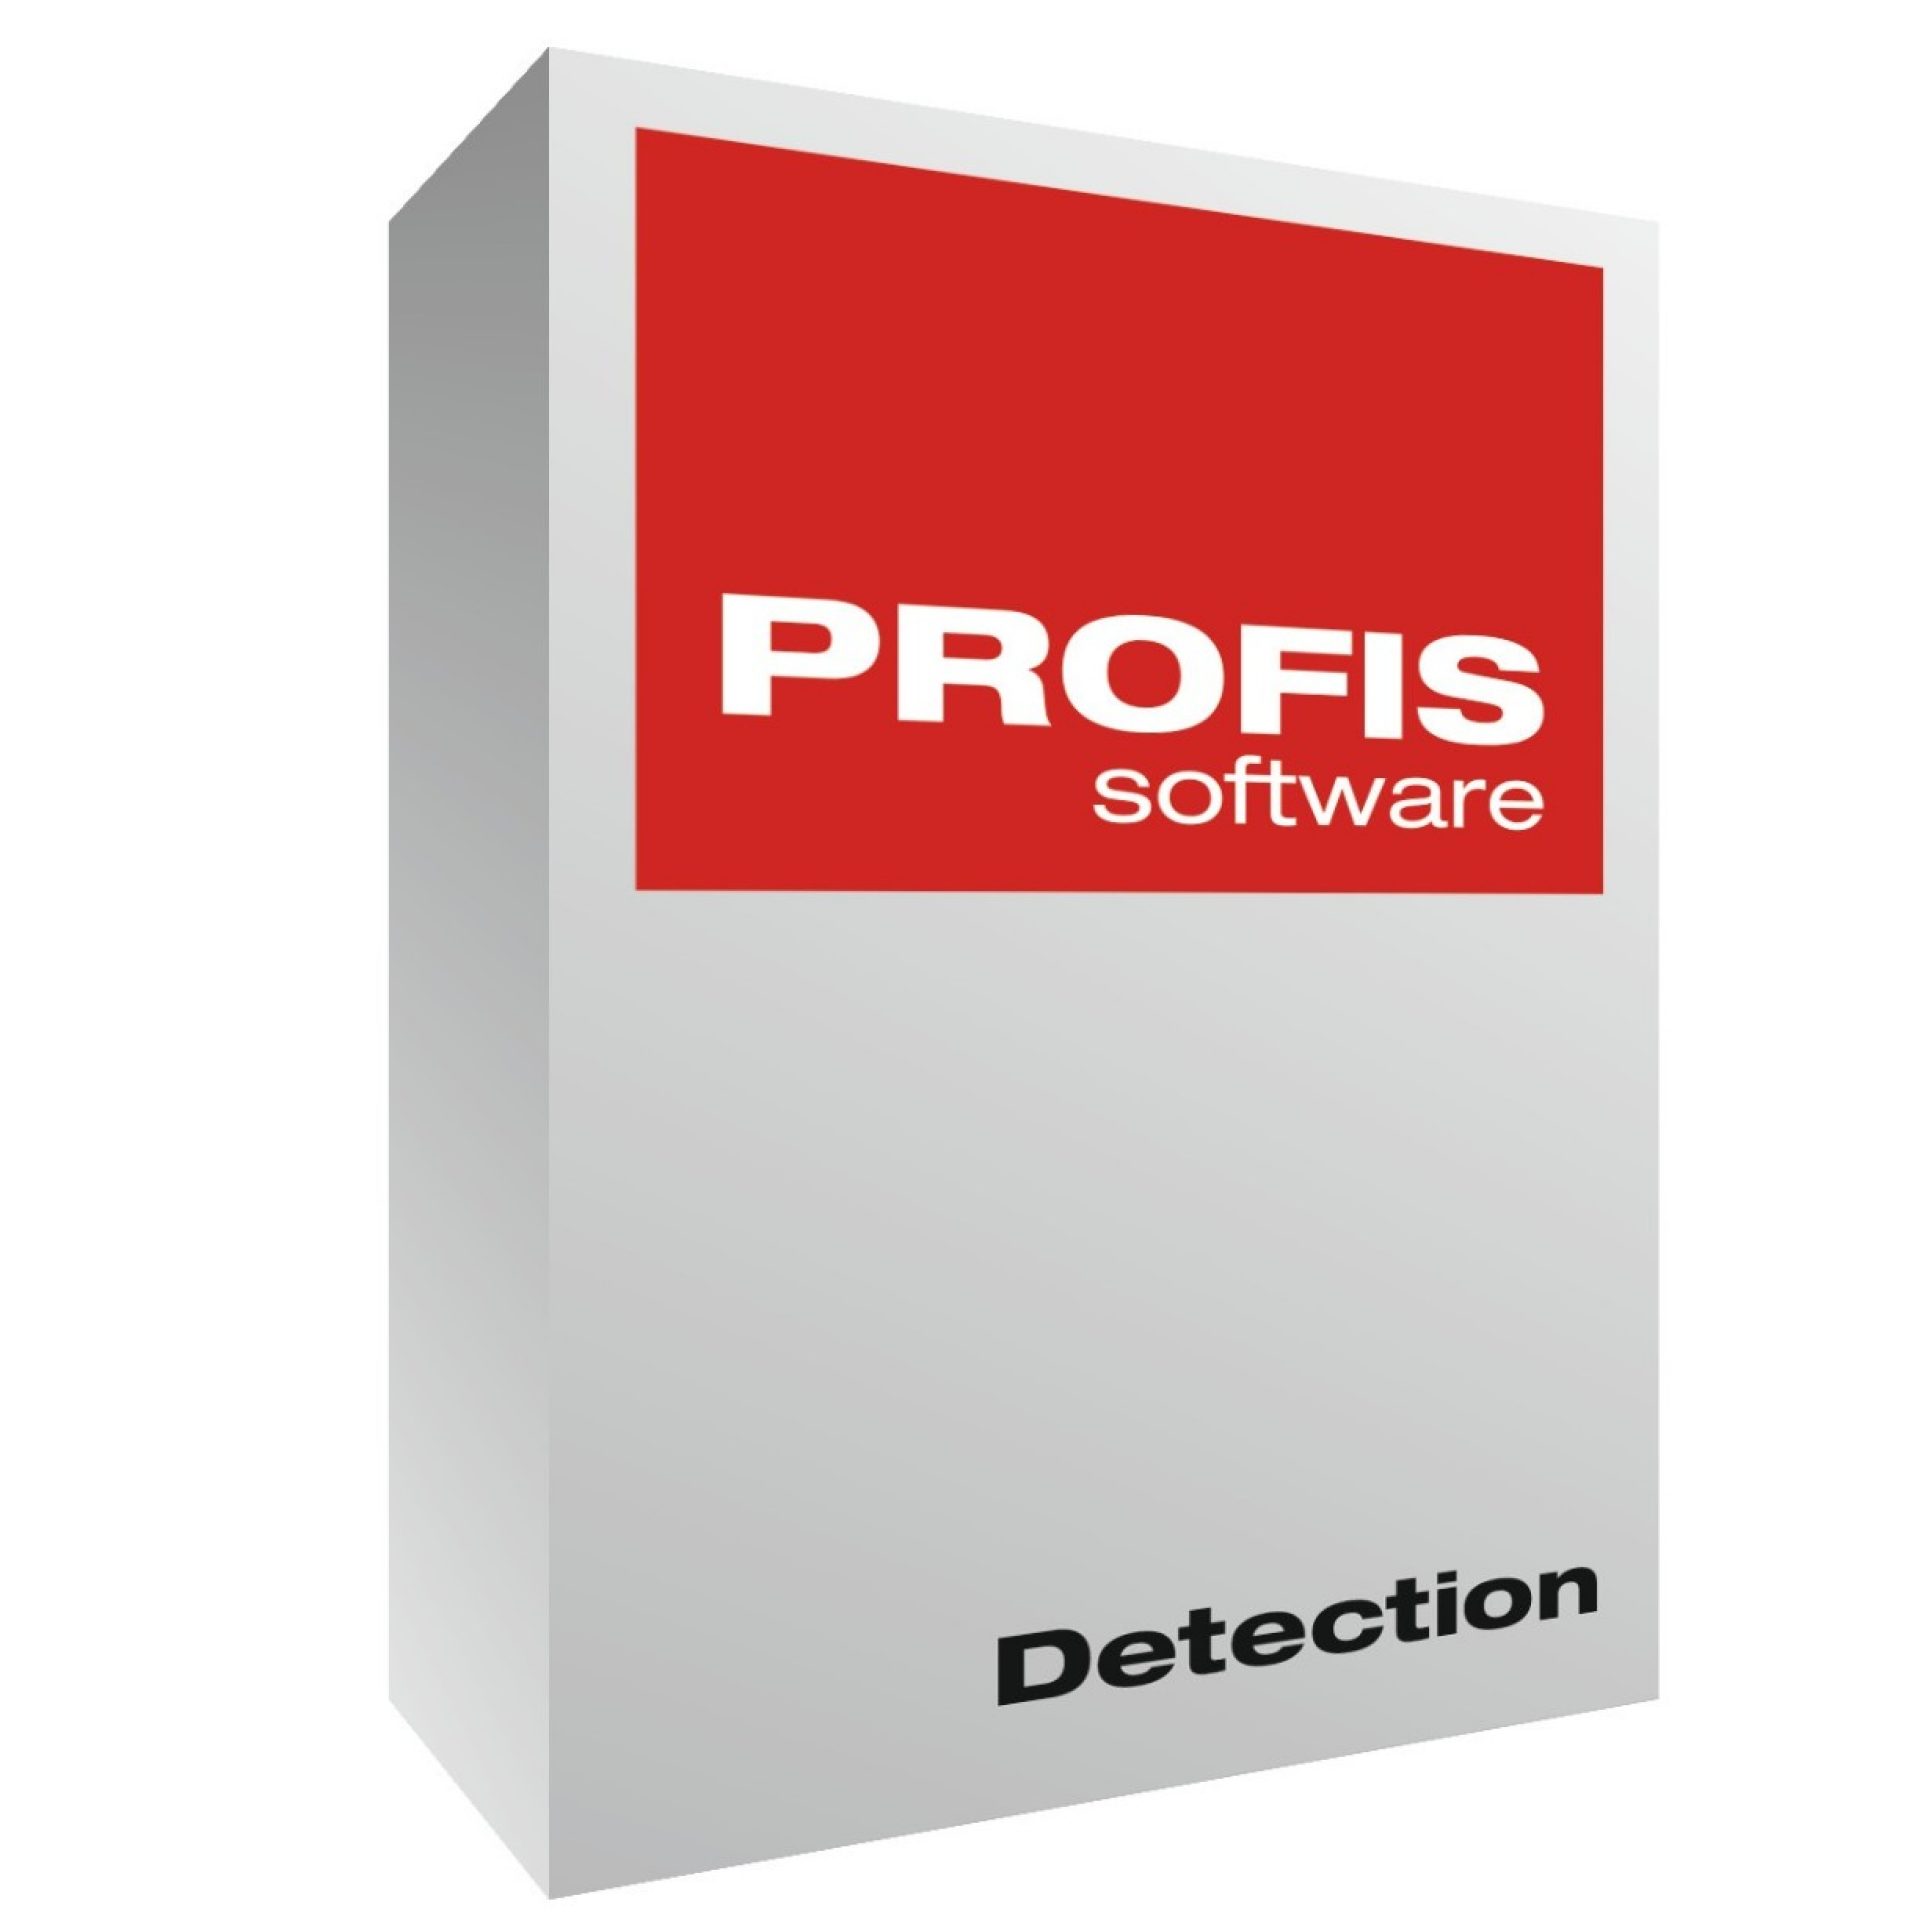 Profis detection concrete scan analysis software for structural analysis and automatic engineering report creation